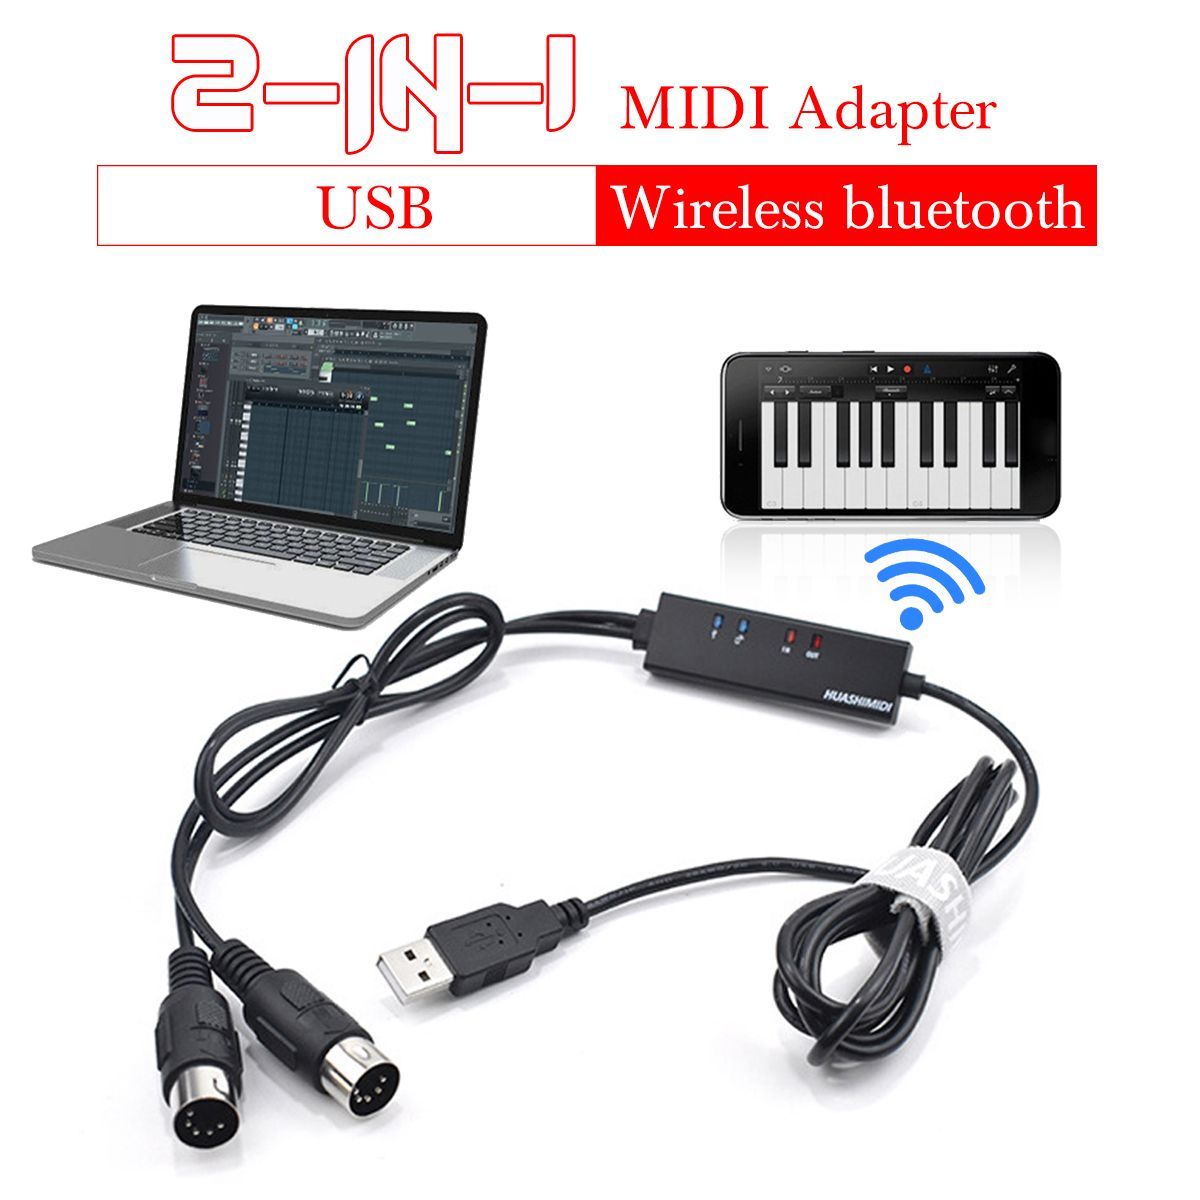 MIDI-to-USB-Wired-to-bluetooth-Wireless-Cable-Adapter-Converter-for-Windows-PC-for-iOS-Android-Mobil-1529622